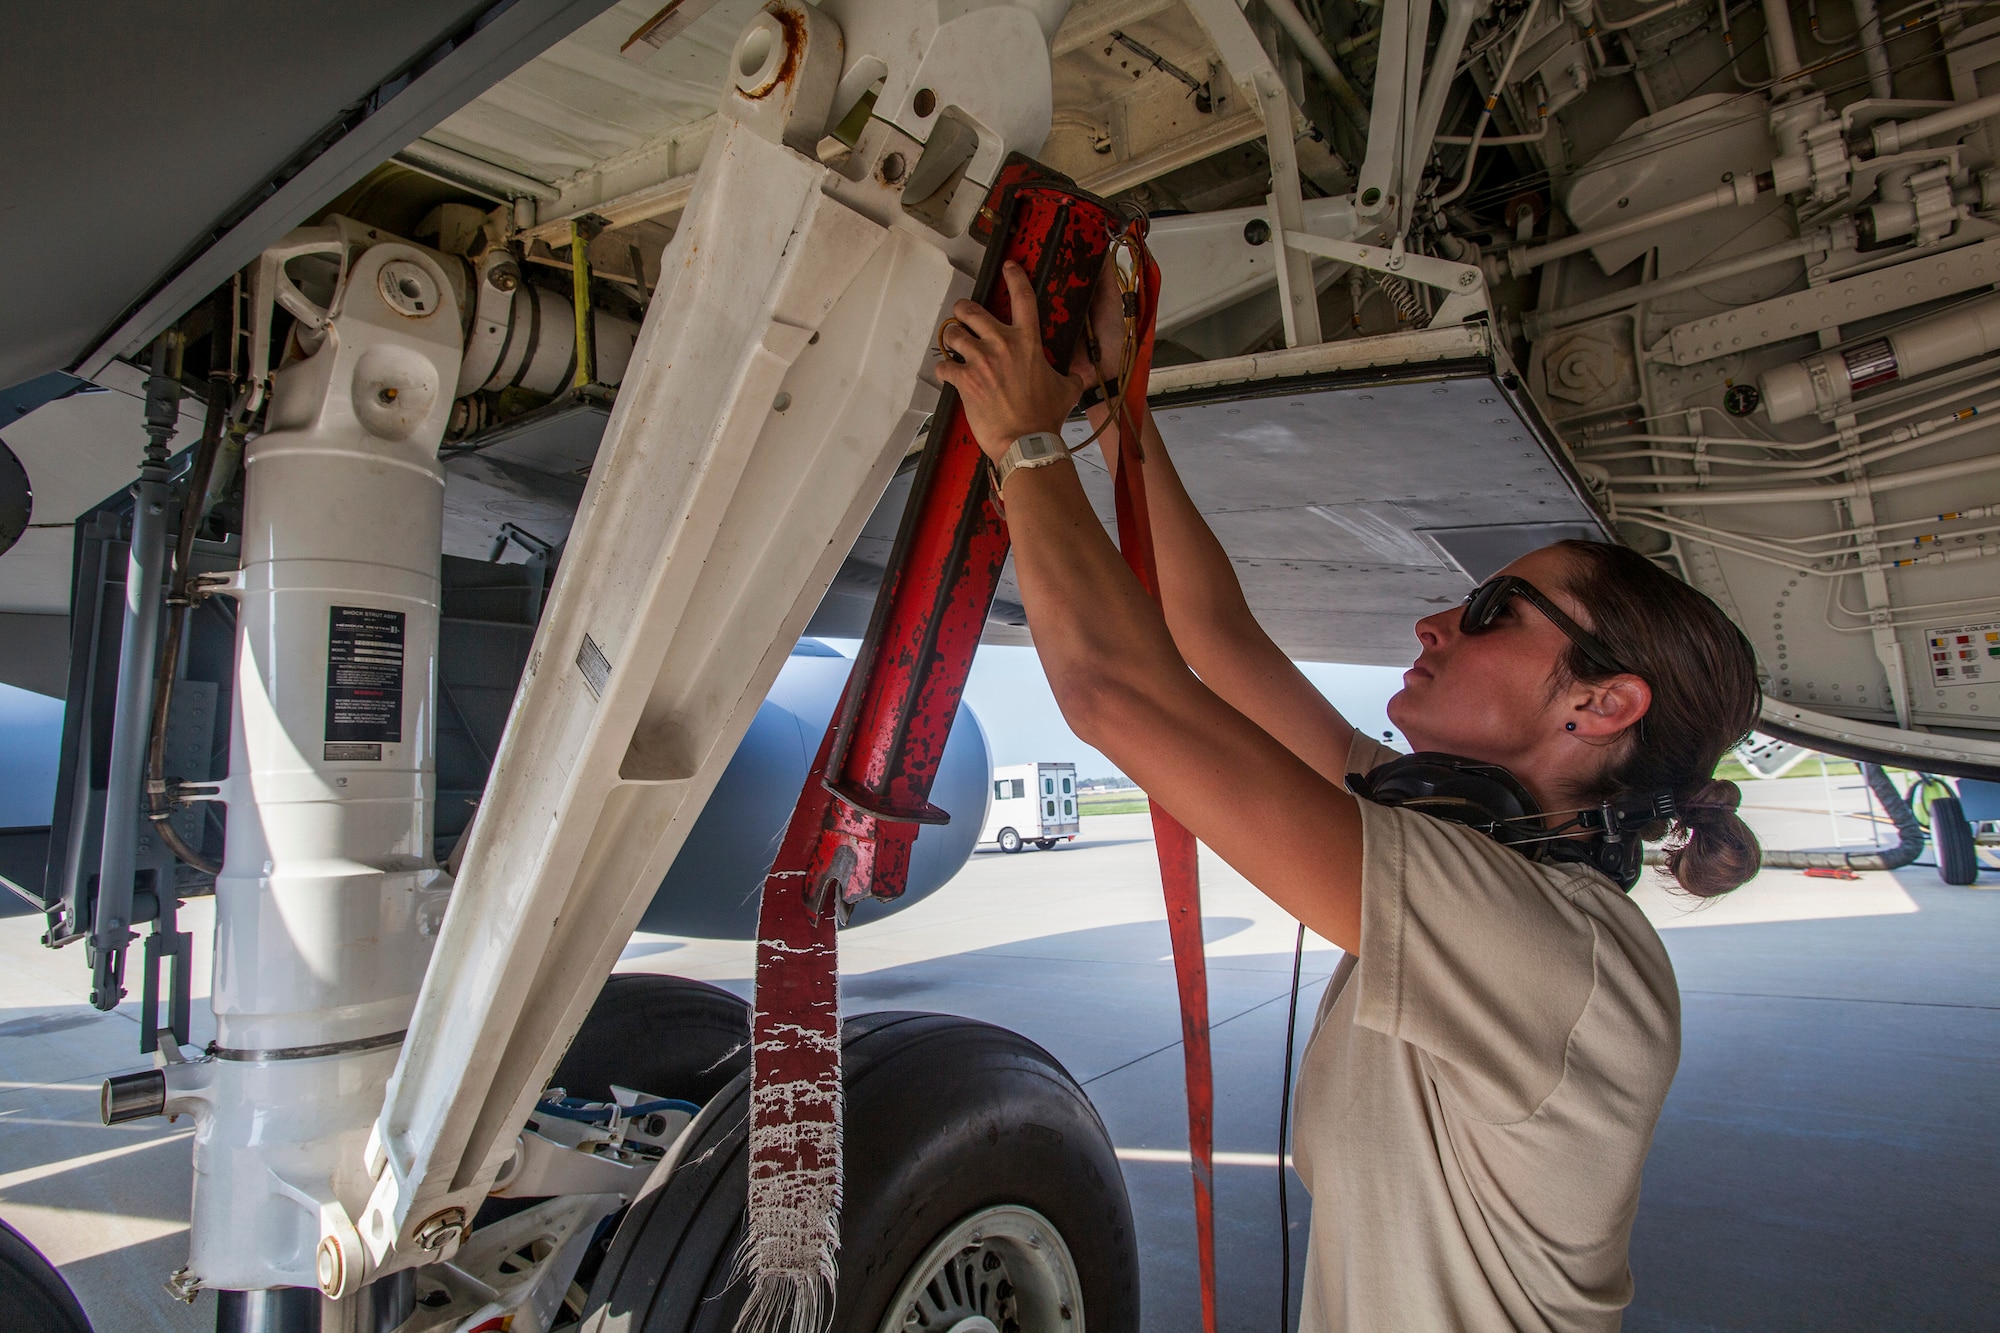 Senior Airman Ashley V. Chytraus, a crew chief with the 108th Wing, New Jersey Air National Guard, prepares a KC-135R Stratotanker for a training flight at Joint Base McGuire-Dix-Lakehurst, N.J., June 11, 2015. Chytraus was in a motorcycle accident June 21, 2014. The collision broke two vertebrae in Chytraus’s neck, crushed her hand, mangled the quadriceps tendon in her leg, forced two splintered ribs into her liver and fractured her elbow. In addition, she died while being medevaced to the hospital. 358 days later, she passed all portions of the Air Force Physical Fitness Test and received an excellent. (U.S. Air Force photo by Master Sgt. Mark C. Olsen/Released)